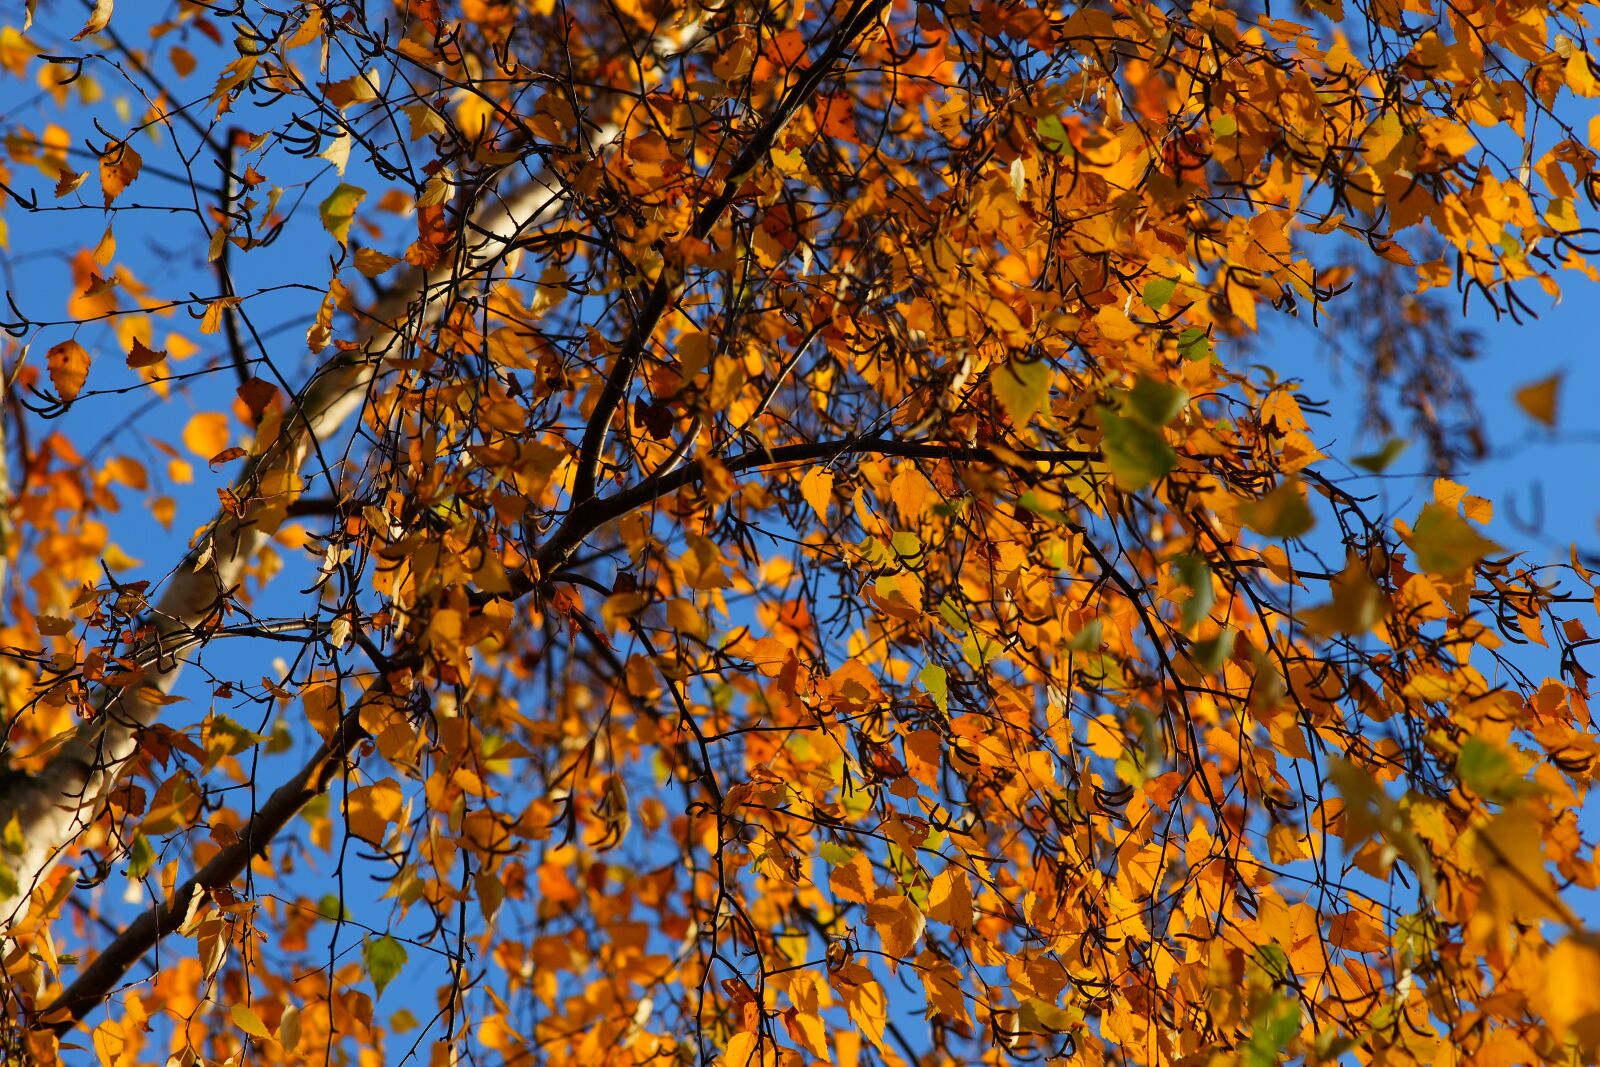 Sony a99 II sample photo. Birch, late autumn, nature photography